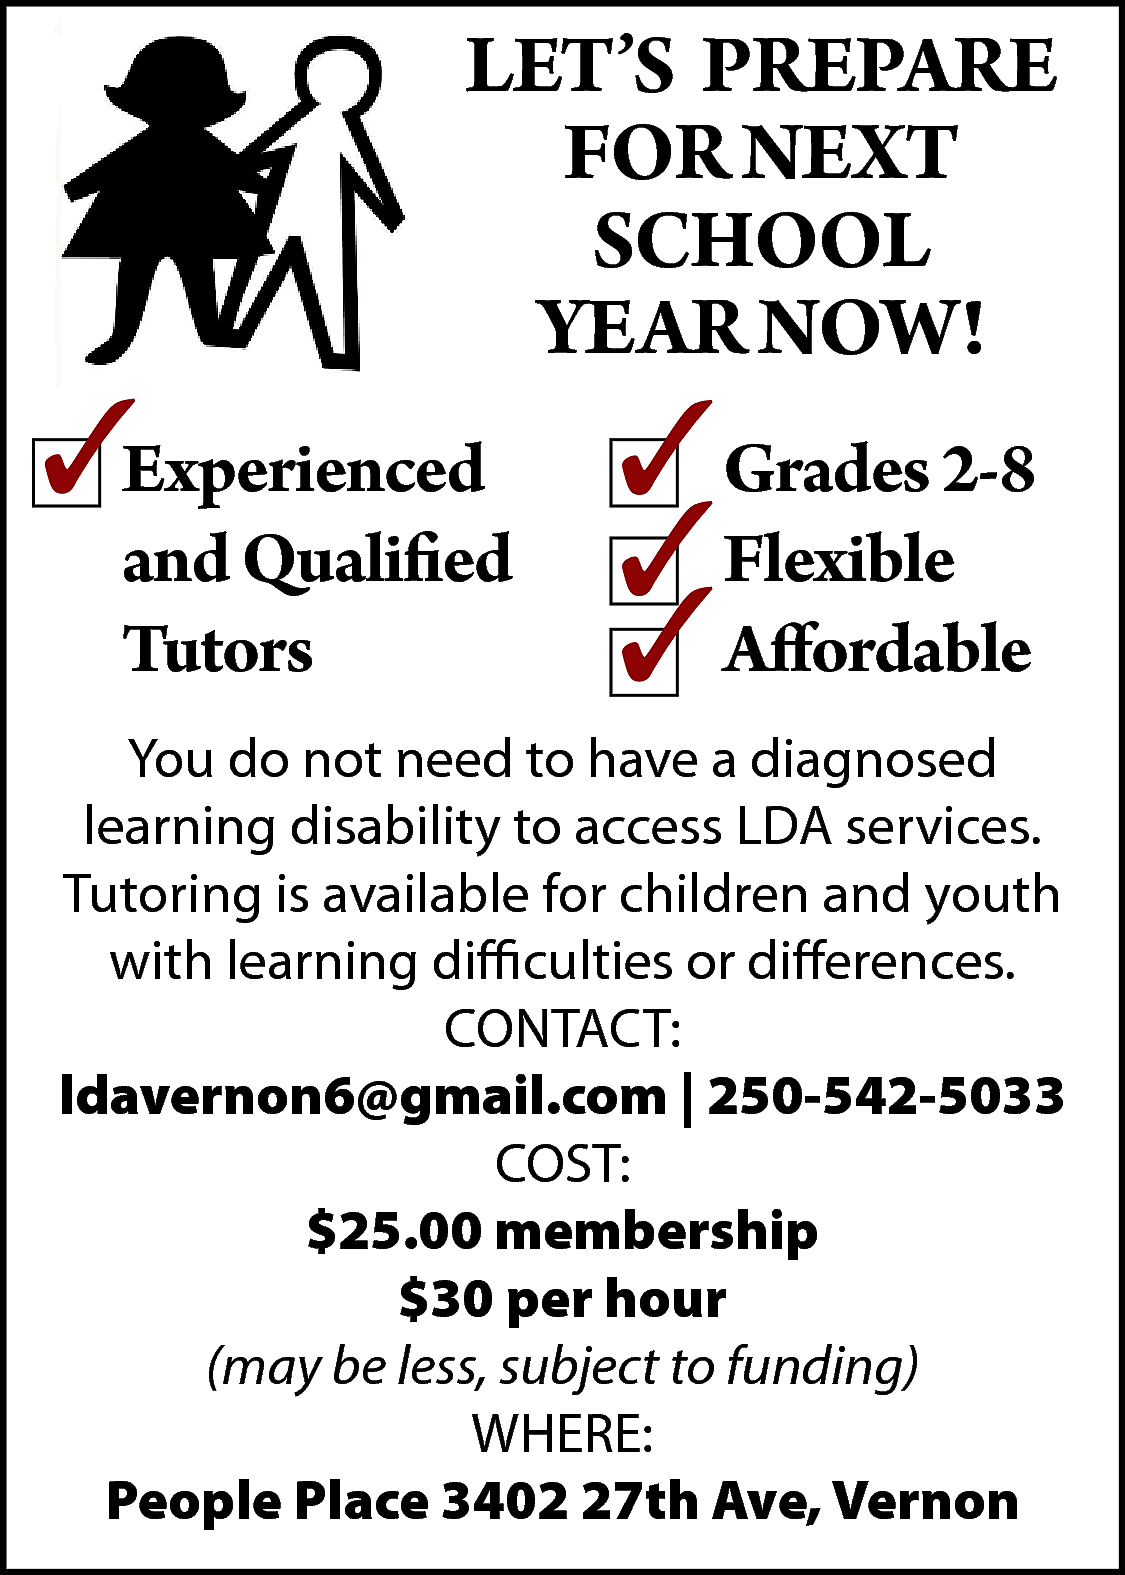 LET’S PREPARE <br>FOR NEXT <br>SCHOOL  LET’S PREPARE  FOR NEXT  SCHOOL  YEAR NOW!  Experienced  and Qualified  Tutors    Grades 2-8  Flexible  Affordable    You do not need to have a diagnosed  learning disability to access LDA services.  Tutoring is available for children and youth  with learning difficulties or differences.  CONTACT:  ldavernon6@gmail.com | 250-542-5033  COST:  $25.00 membership  $30 per hour  (may be less, subject to funding)  WHERE:  People Place 3402 27th Ave, Vernon    